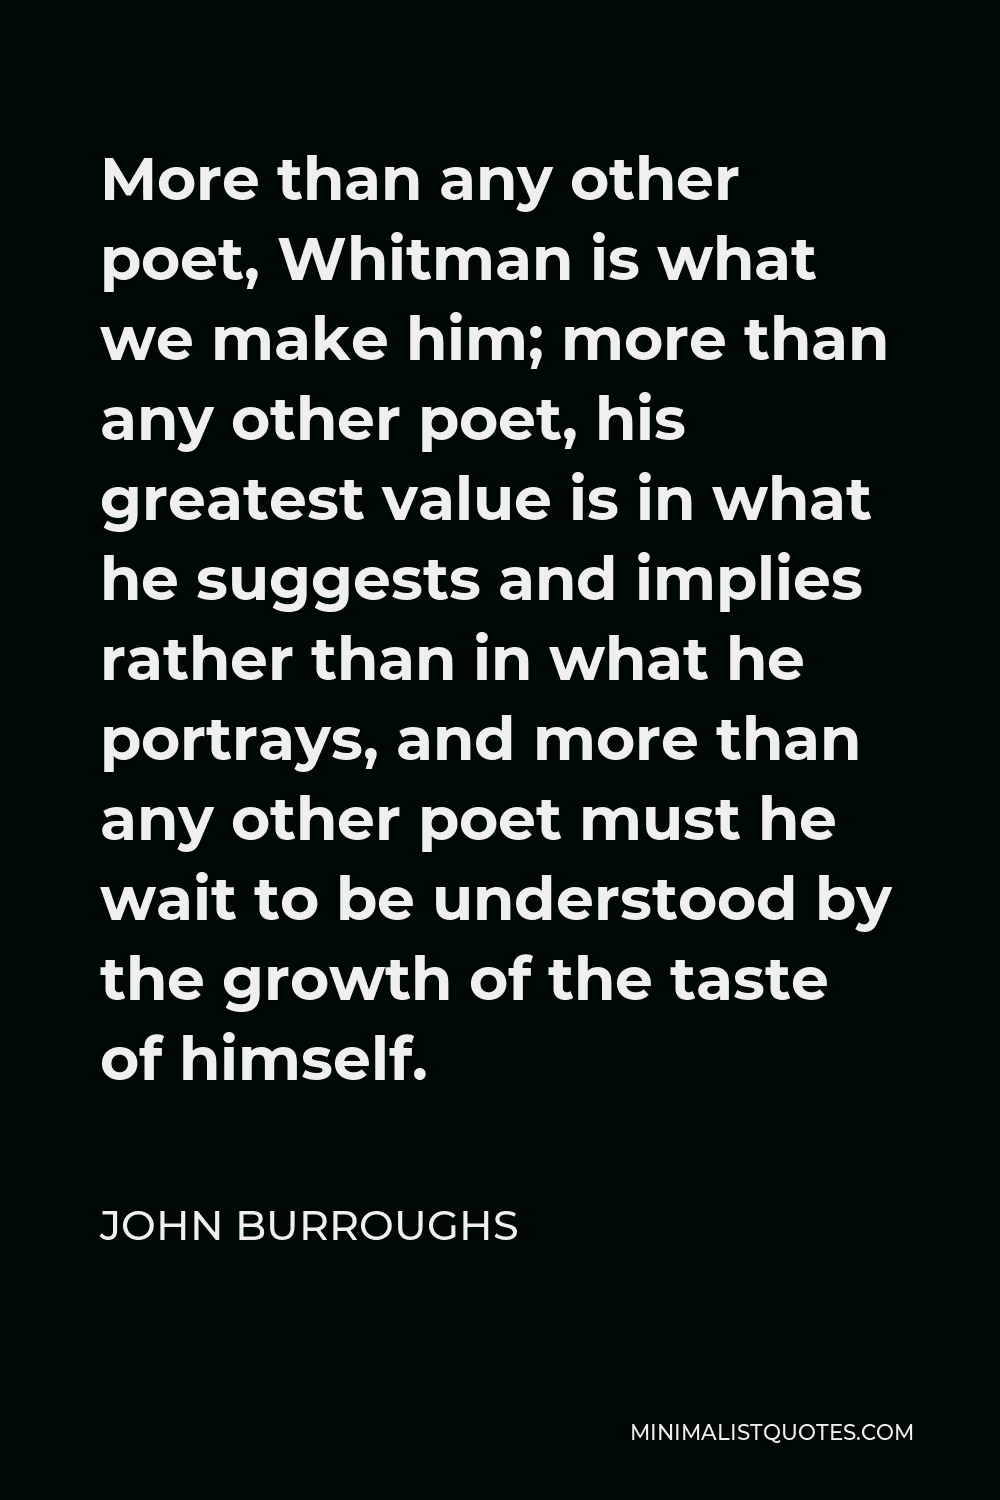 John Burroughs Quote More Than Any Other Poet Whitman Is What We Make Him More Than Any Other 3149